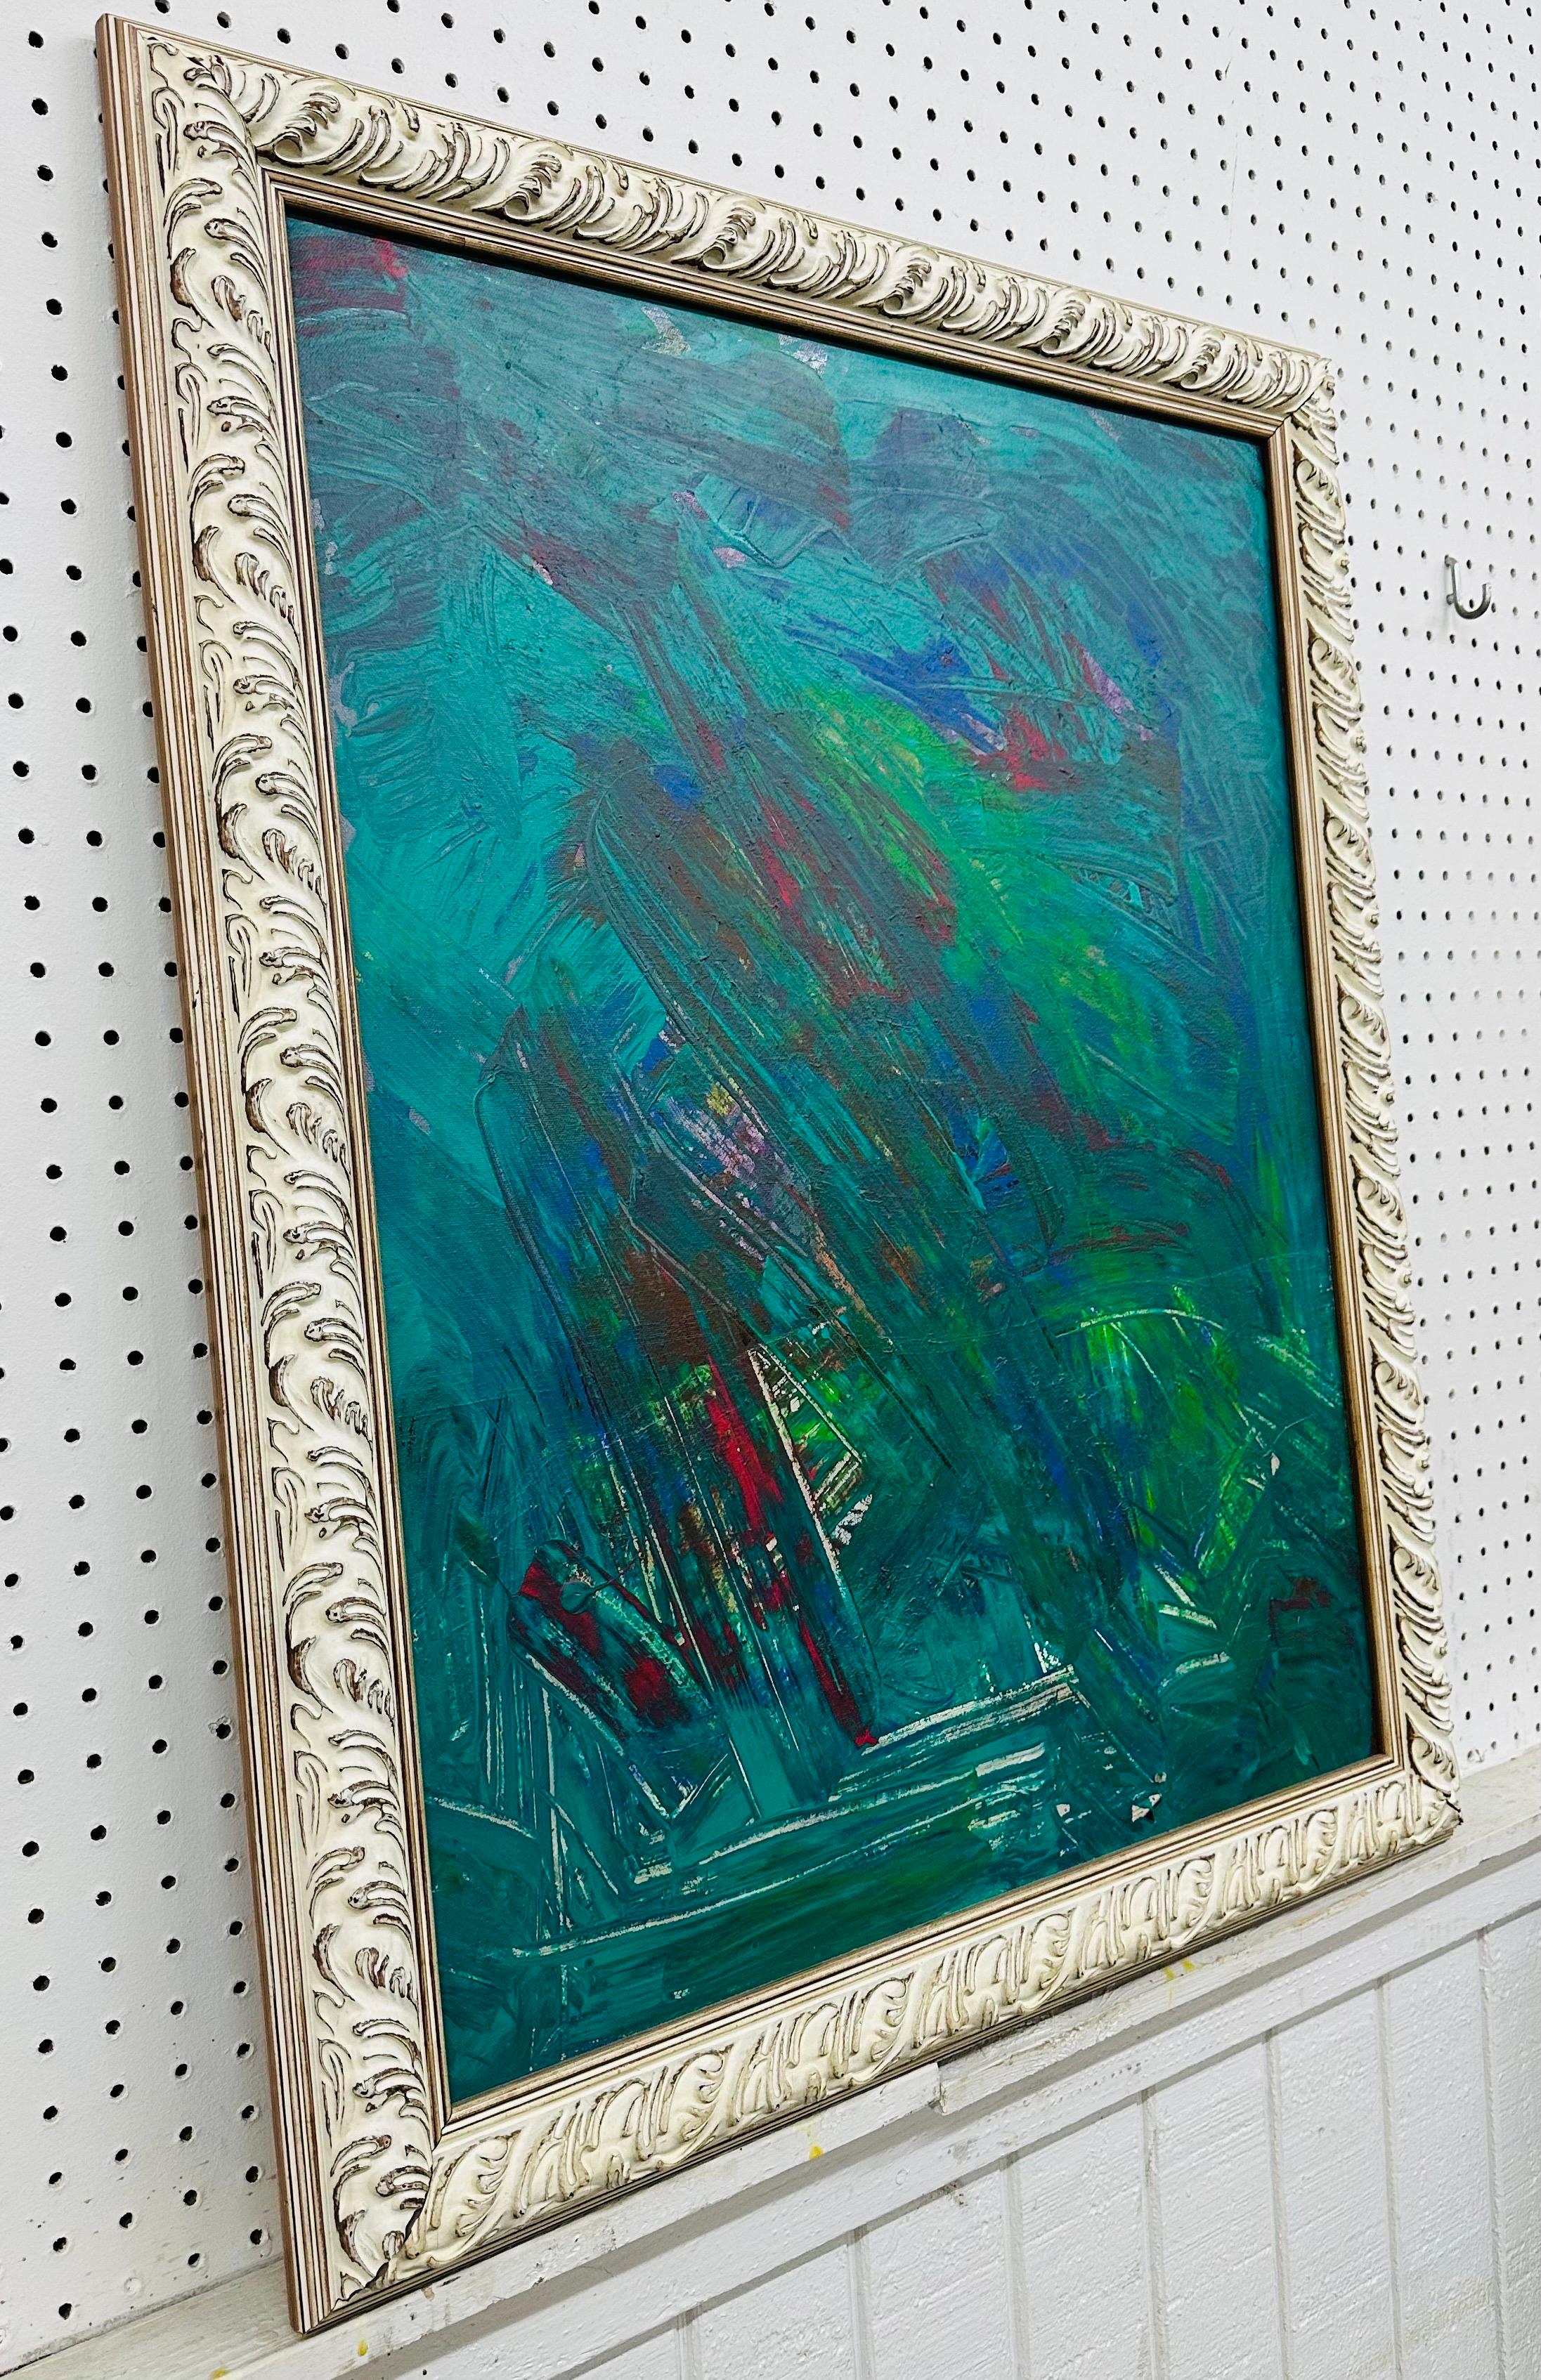 This listing is for a Modern Expressionist Abstract Painting. Featuring a vintage distressed white wood frame, original expressionist style abstract art with a mixture of colors, and a wire on the back for hanging. This is an exceptional piece by